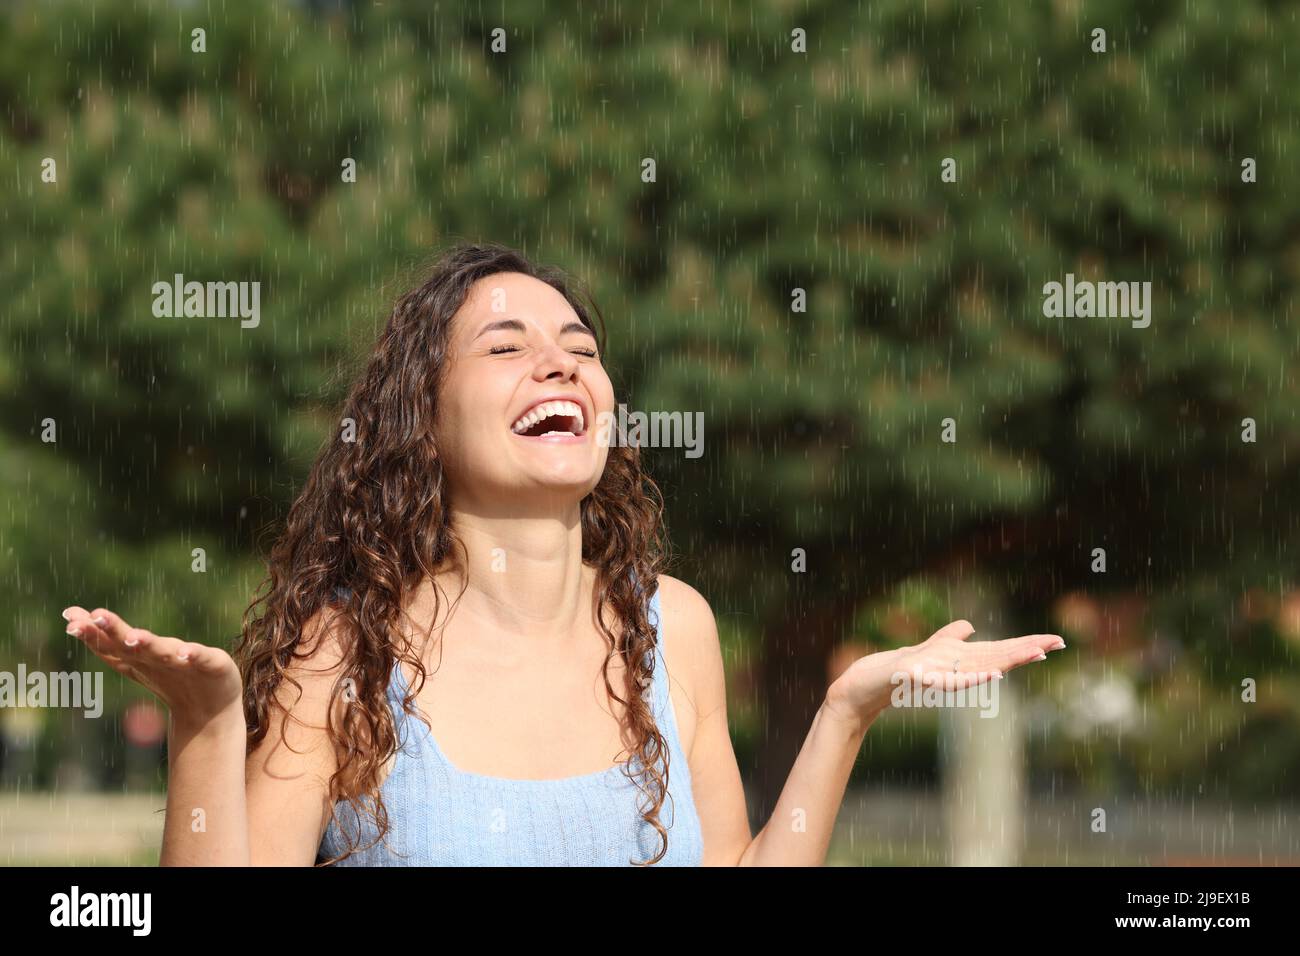 Happy woman laughing and enjoying under sudden rain in a sunny day Stock Photo